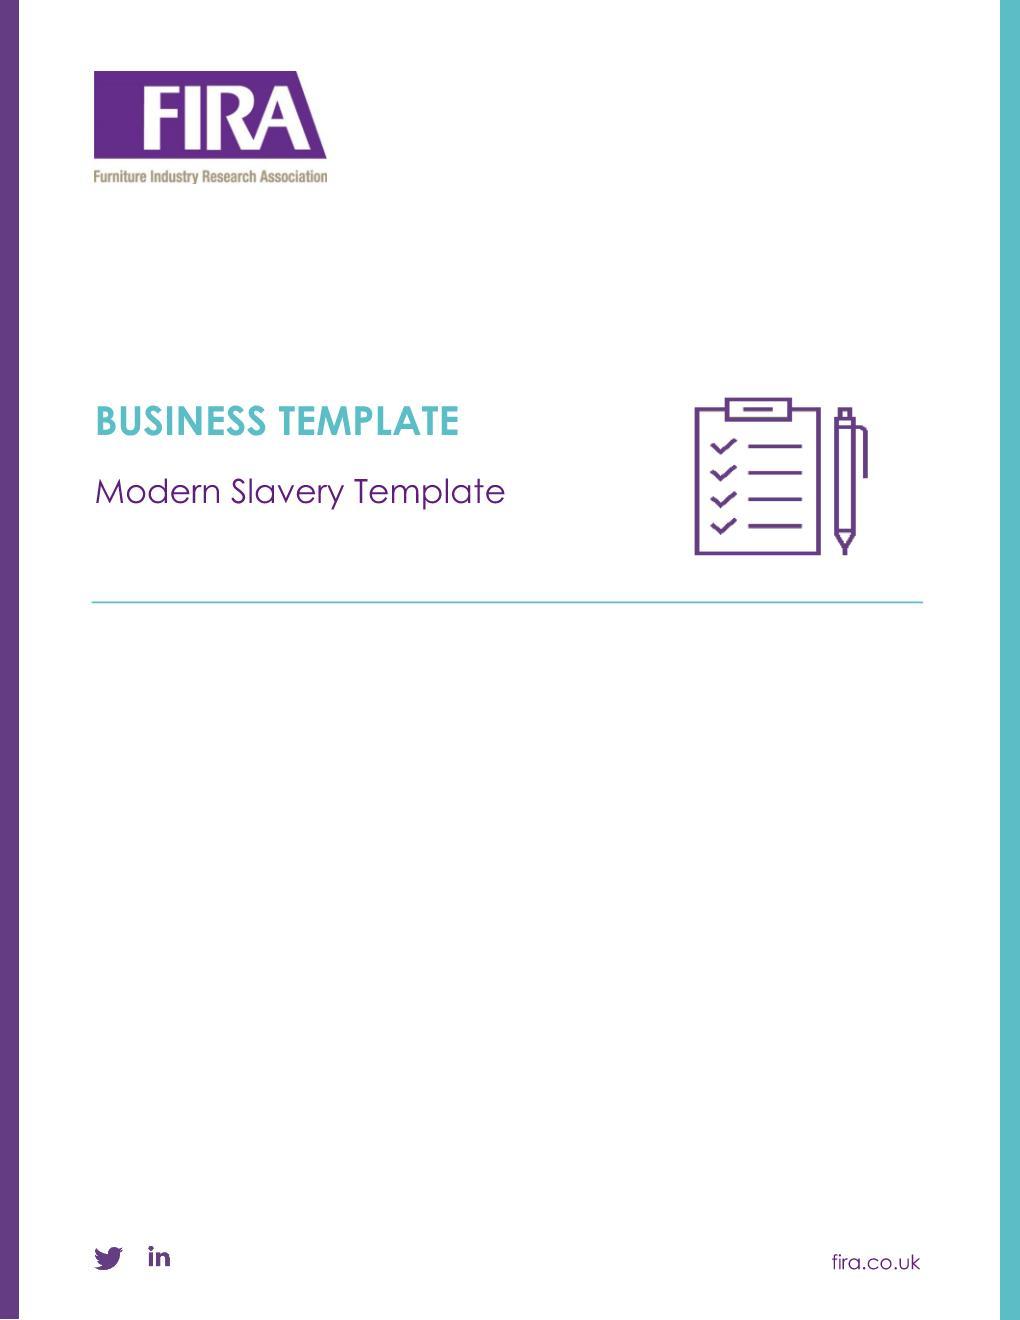 Modern Slavery Policy Guidance and Template